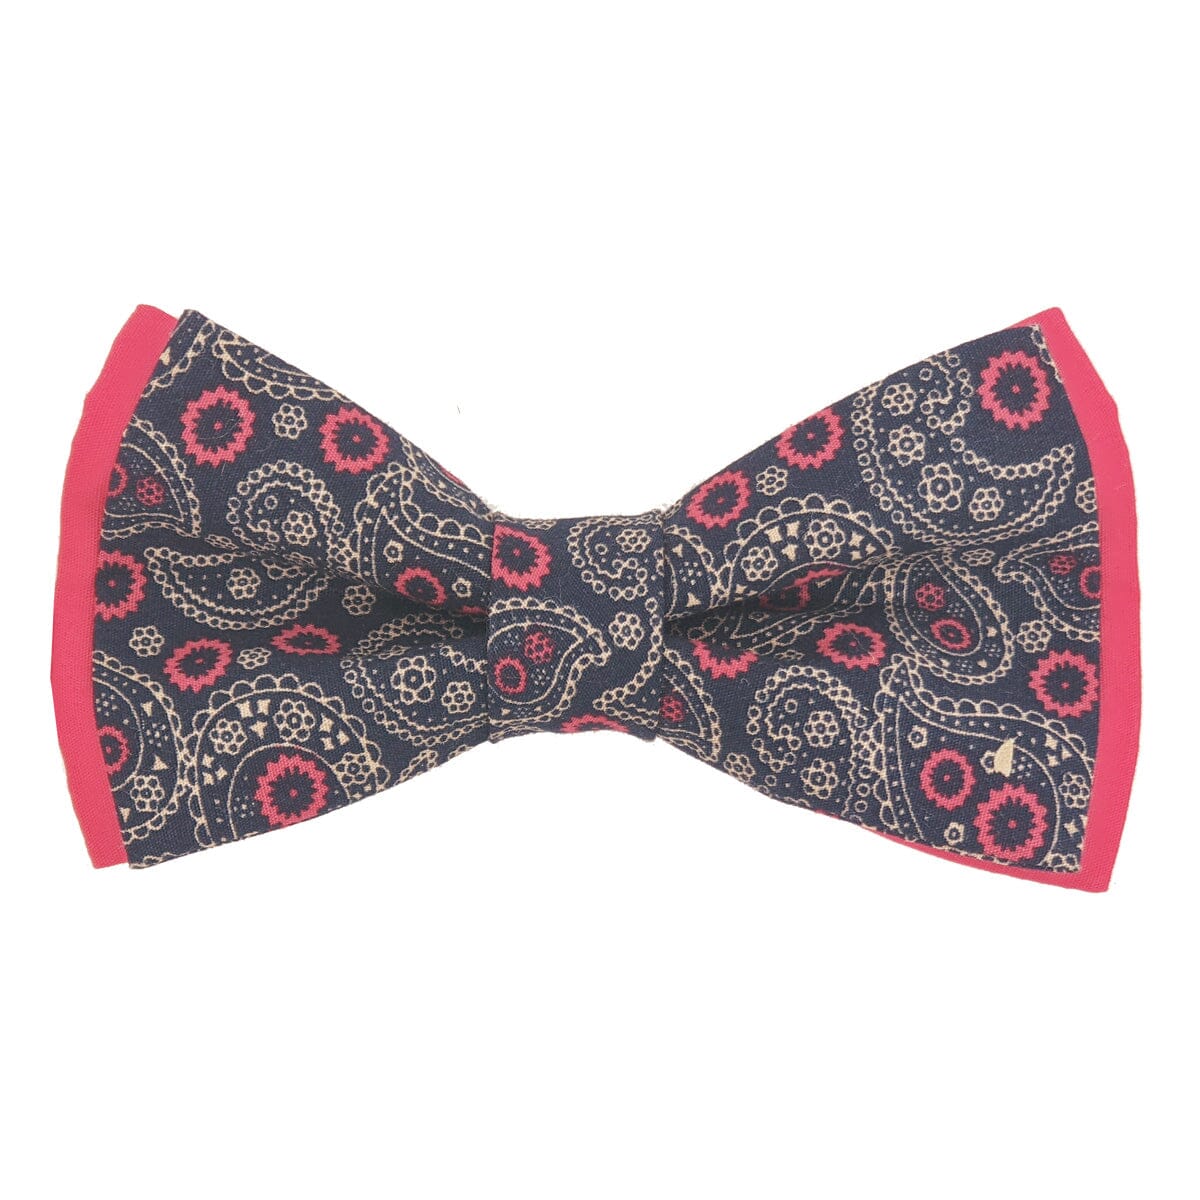 Raspberry Lace Paisley Double Bow Tie - Bow Ties - - THREADPEPPER